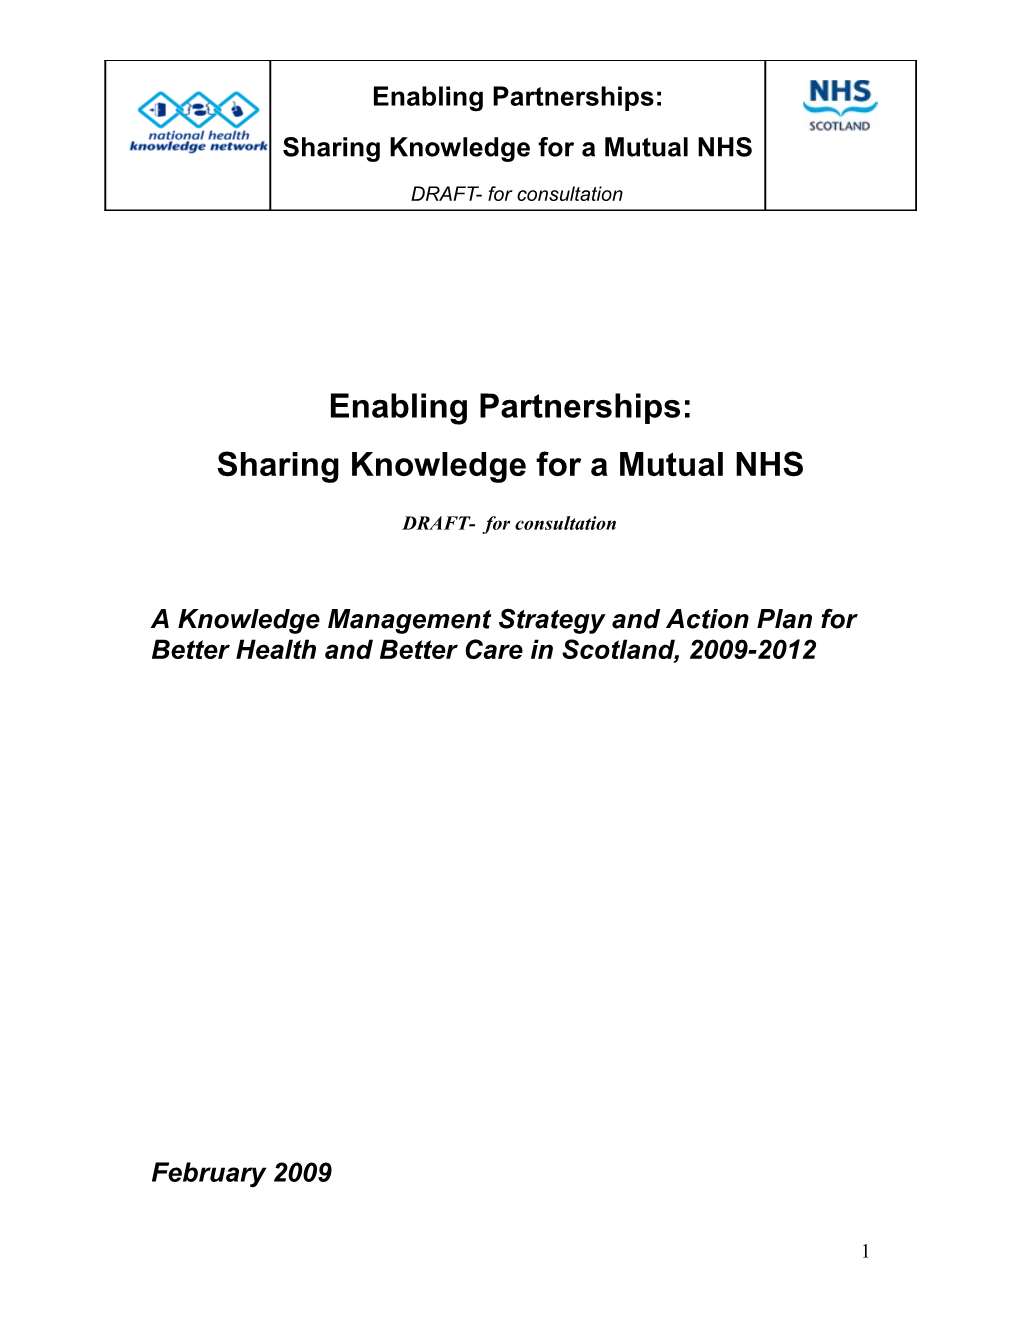 Enabling Partnerships: Sharing Knowledge For A Mutual NHS